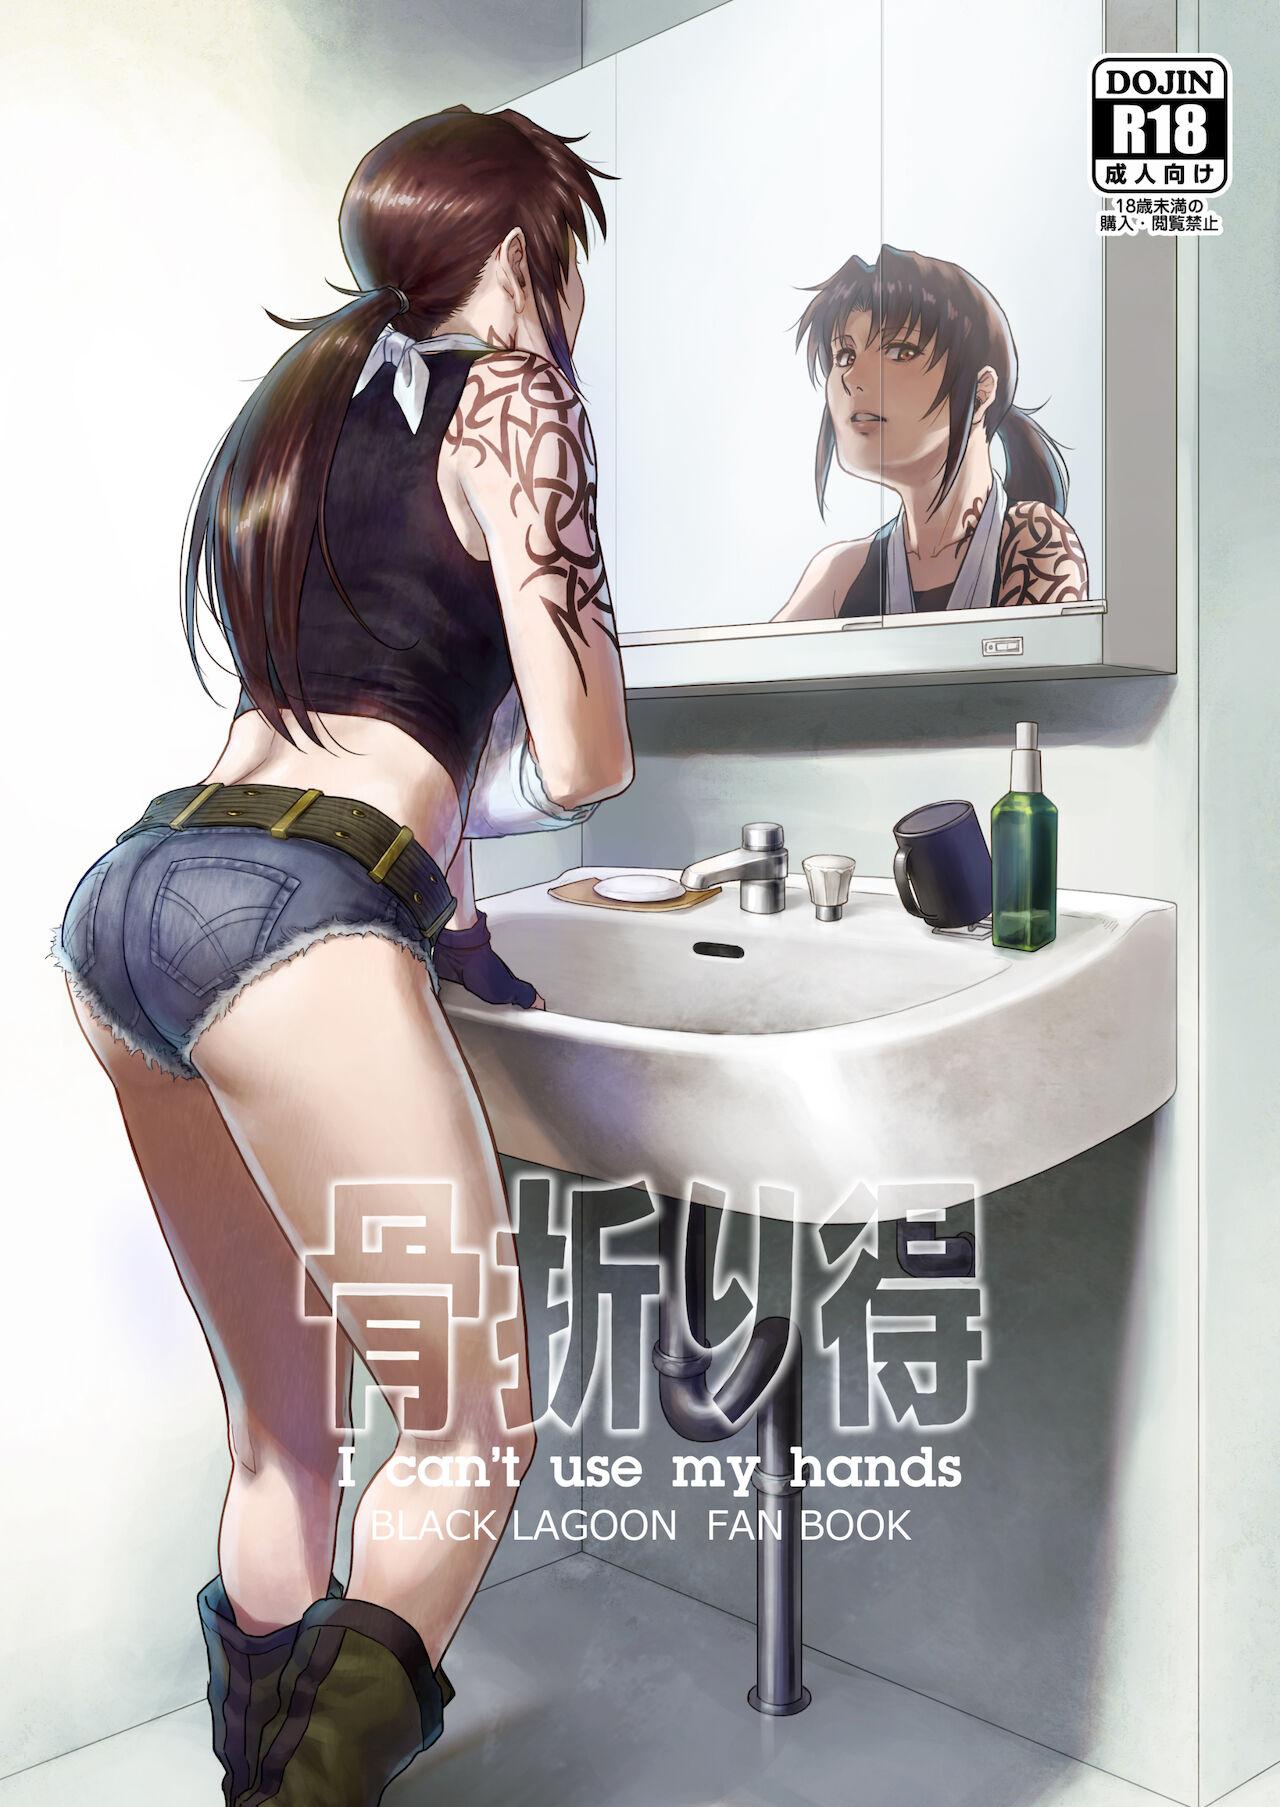 Best Blow Job Ever Honeoridoku - I can't use my hands - Black lagoon White Chick - Picture 1